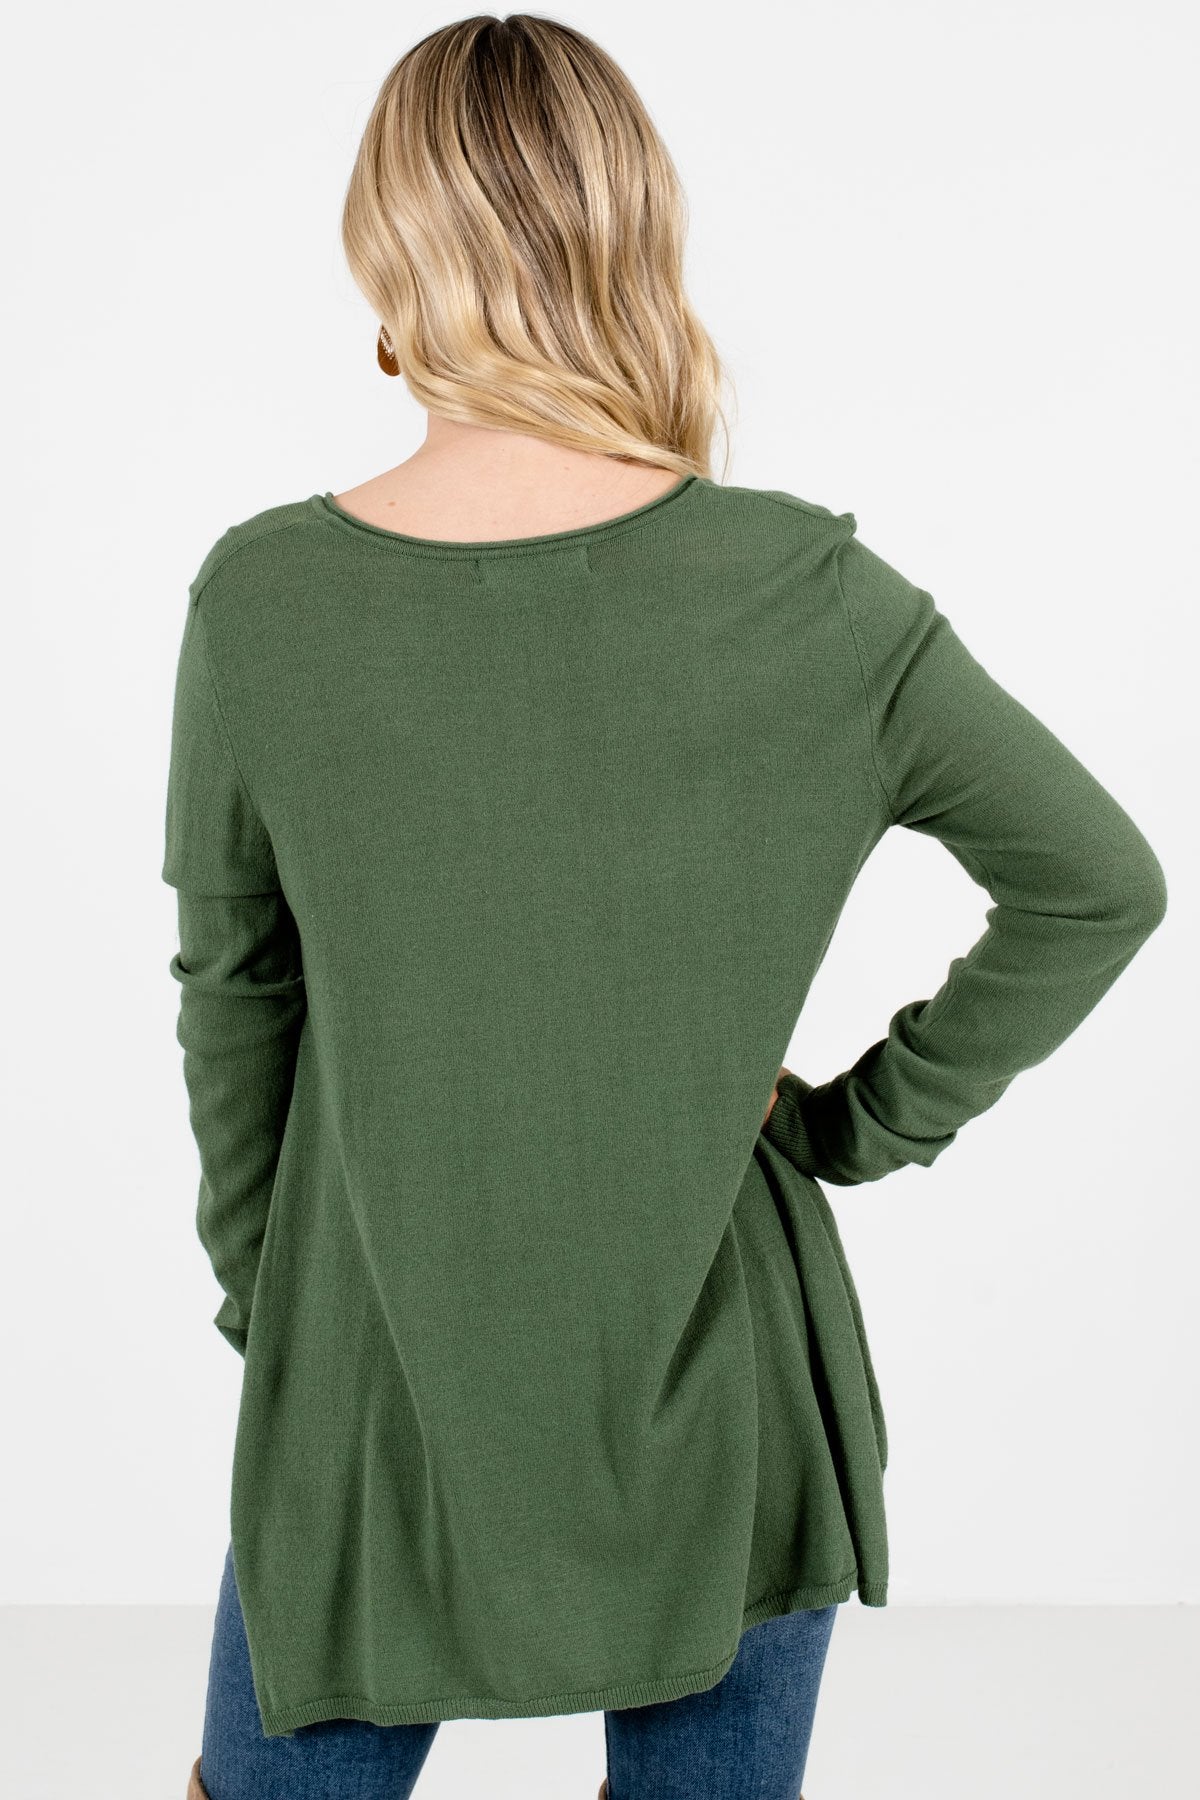 Enjoy the Moment Olive Sweater | Boutique Outerwear for Women - Bella ...